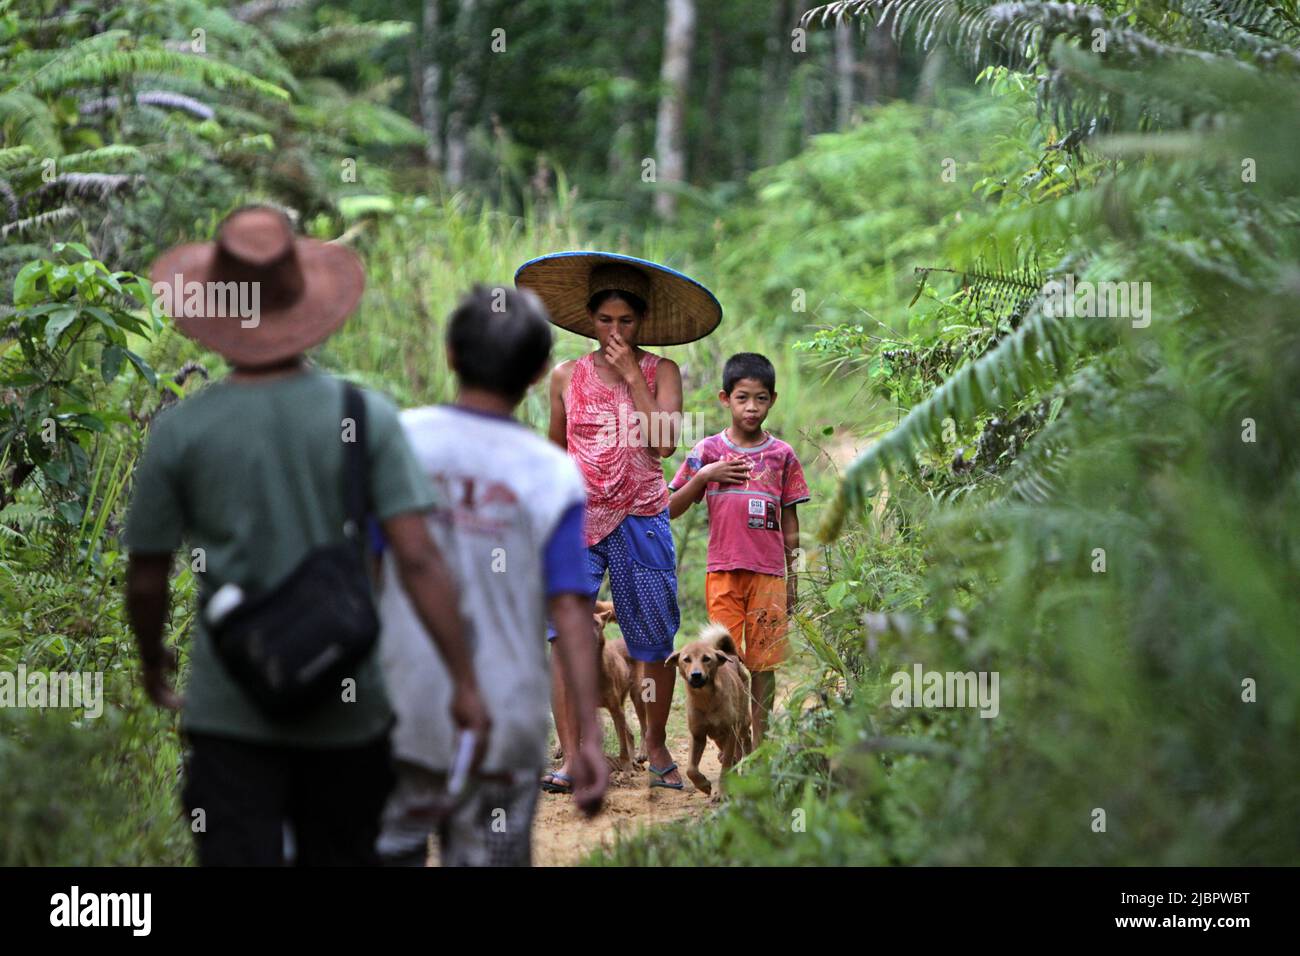 A woman with a child and dogs walking on a rural pathway, travelling in opposite direction to men during an ecotourism assessment in Nanga Raun village, Kalis, Kapuas Hulu, West Kalimantan, Indonesia. Stock Photo